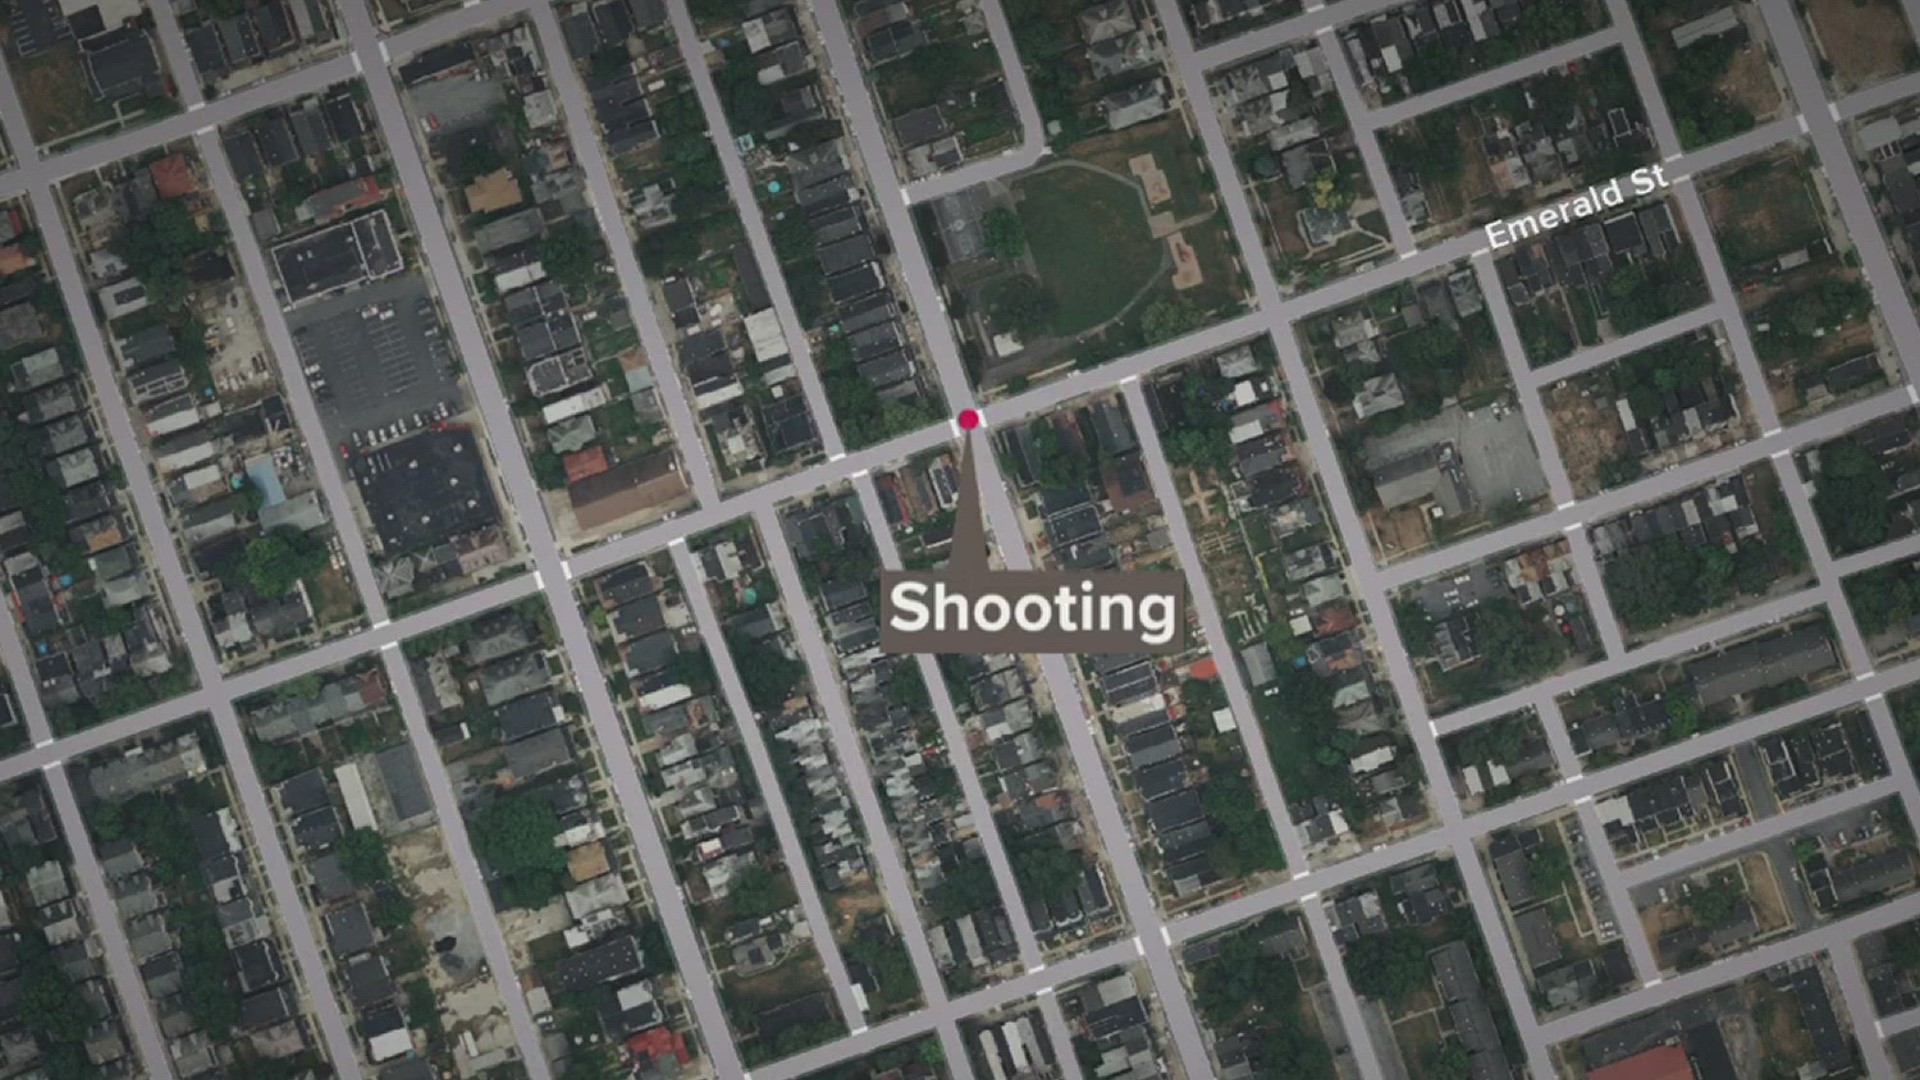 Probation officers heard gunshots in the area of N. 4th and Emerald Streets around 6:15 p.m., two victims were later located.